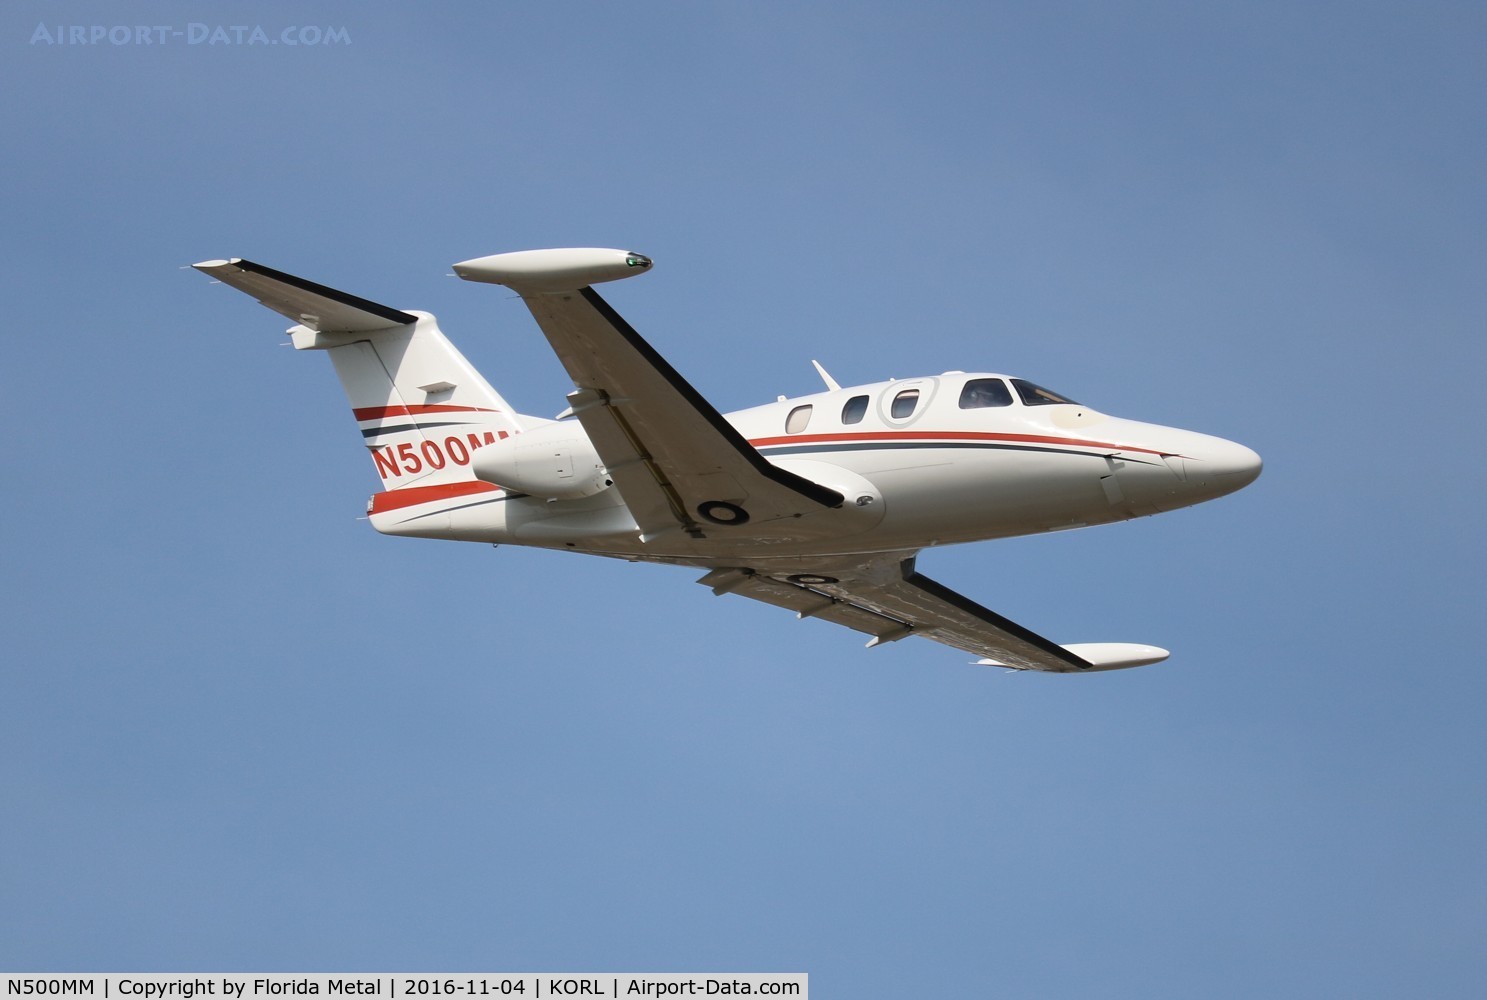 N500MM, 2008 Eclipse Aviation Corp EA500 C/N 000139, Eclipse 500 zx